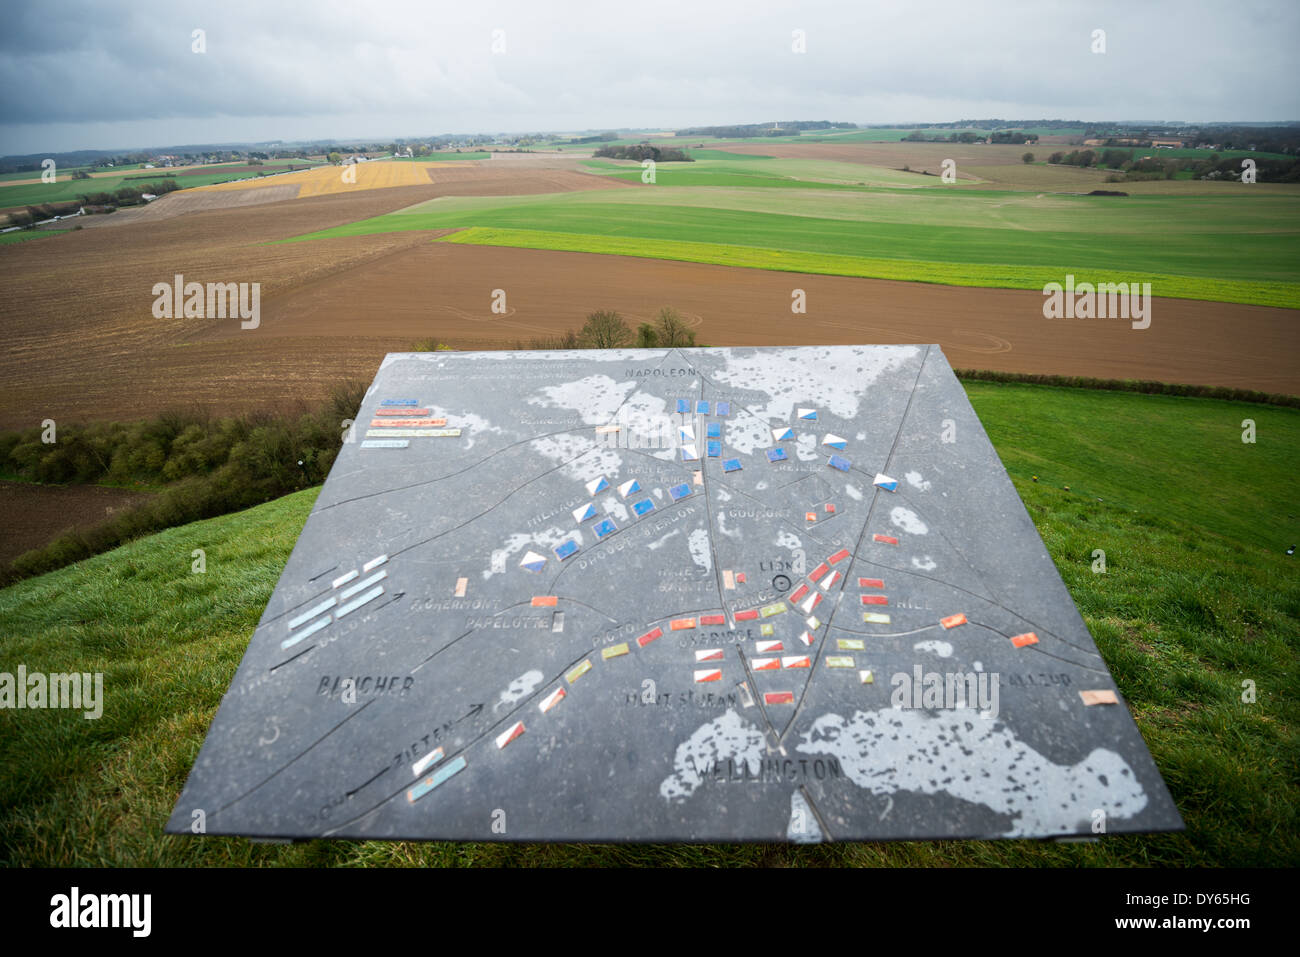 WATERLOO, Belgium — WATERLOO, Belgium — A map of the battle and looking out over the battlefield from the top of the Lion's Mound (Butte du Lion), an artificial hill built on the battlefield of Waterloo to commemorate the location where William II of the Netherlands was injured during the battle. The hill is situated on a spot along the line where the Allied army under the Duke of Wellington's command took up positions during the Battle of Waterloo. The historic Battlefield of Waterloo, where Napoleon Bonaparte faced his final defeat, attracts history enthusiasts and tourists alike, seeking to Stock Photo